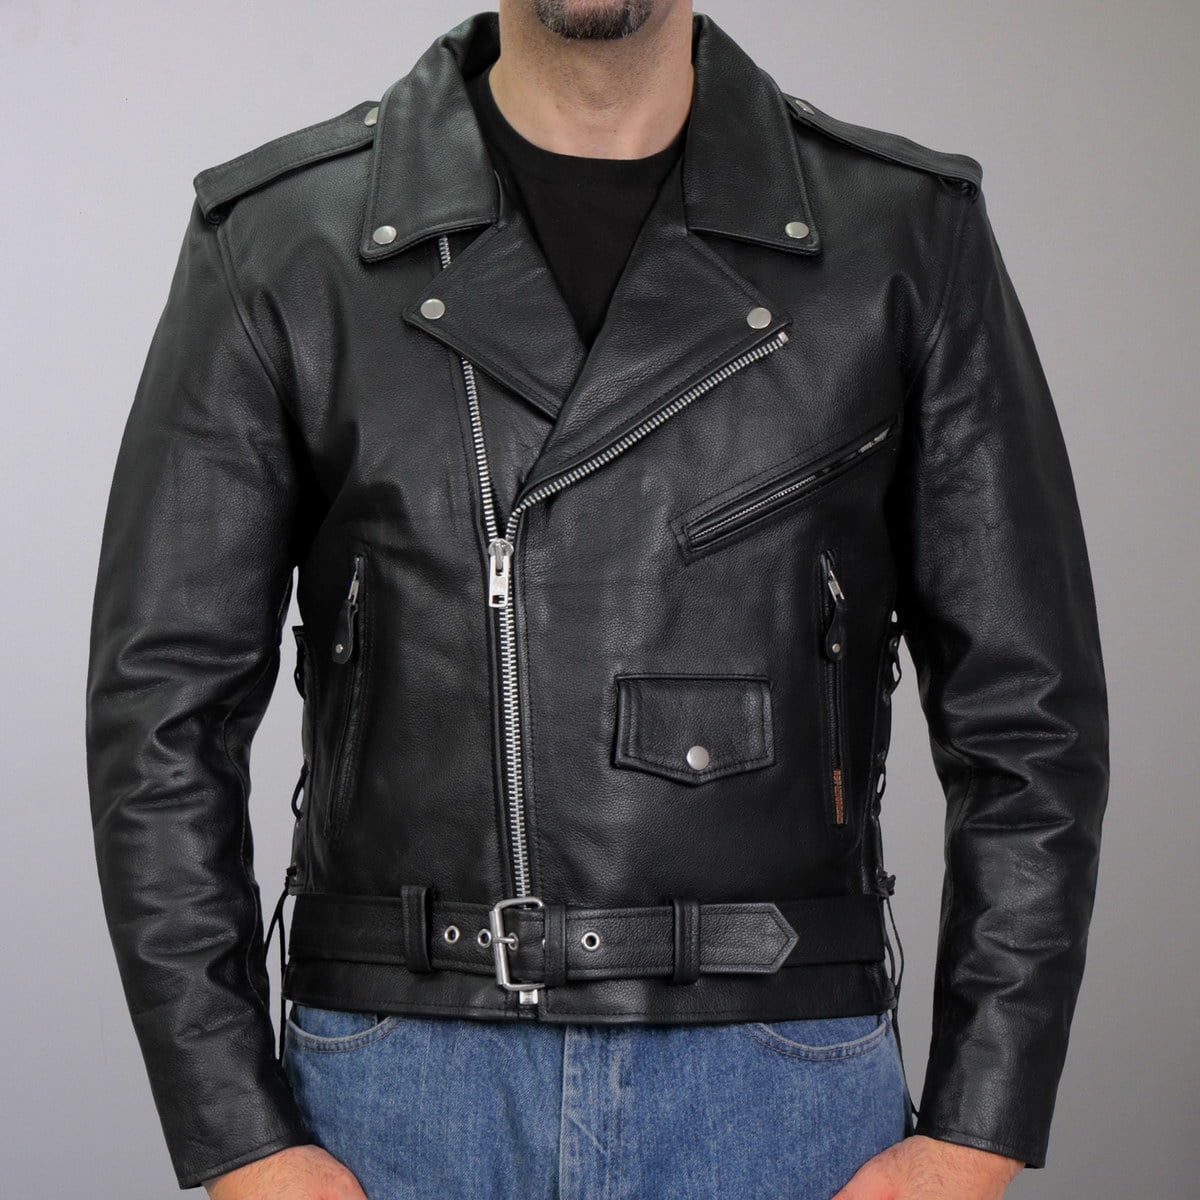 First Manufacturing Black Size 48 Mens Classic Motorcycle Jacket with Zip-Out Liner